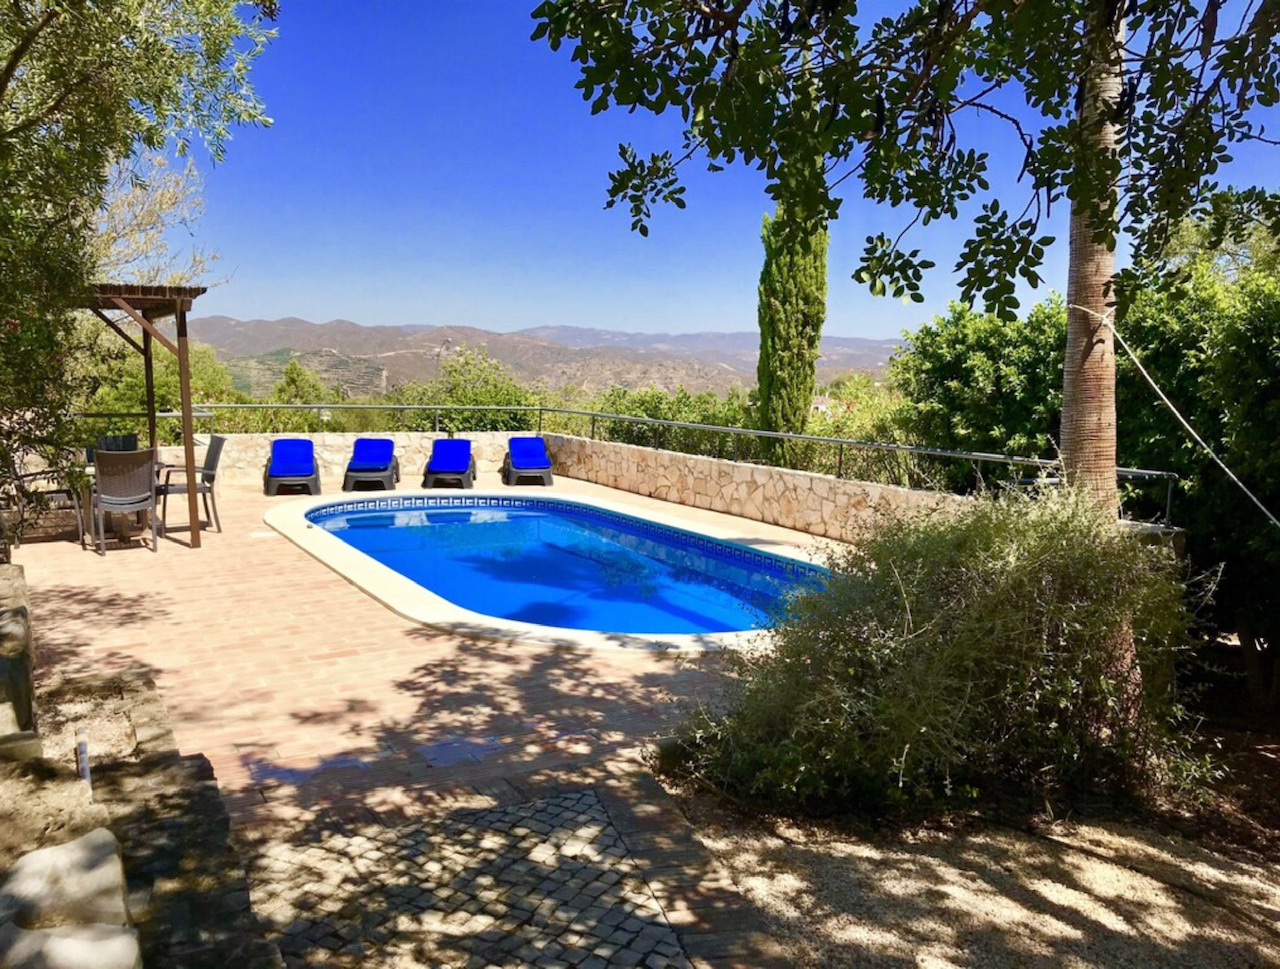 Barranco da Nora, Asseca - Charming country style villa with pool on an elevated position with magnificent views of the tranquil valley - Tavira